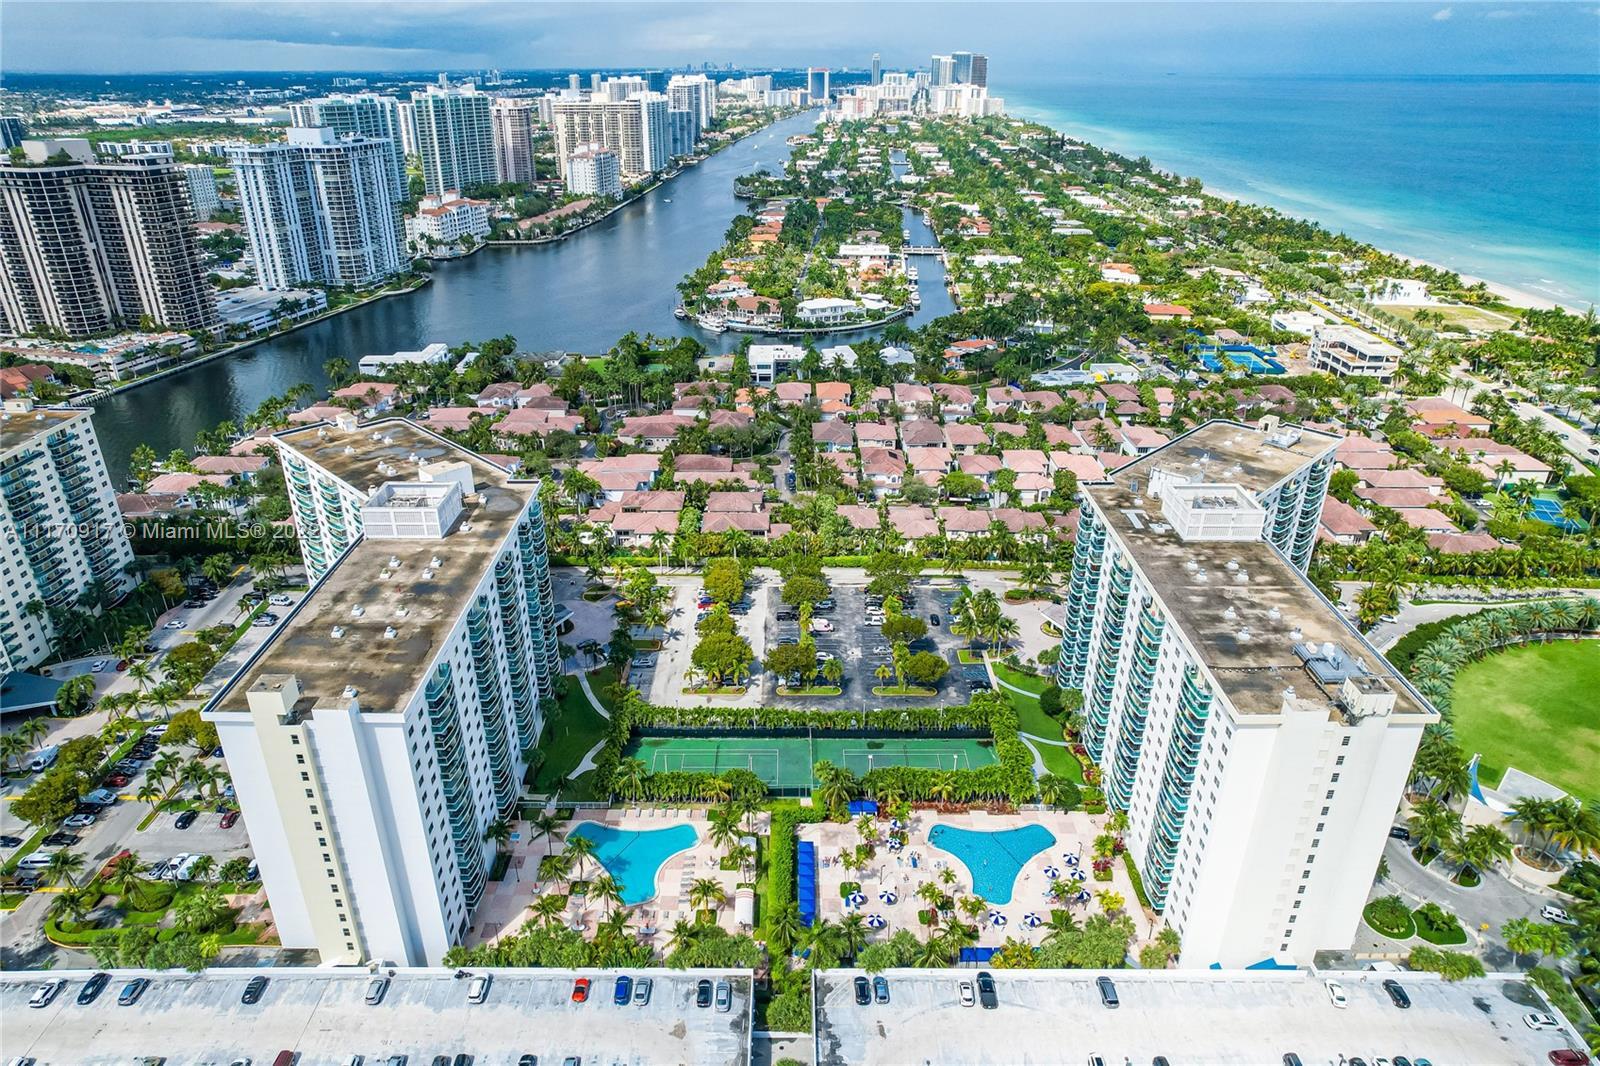 Located in the heart of Florida's Riviera, with magnificent views of Sunny Isles and Aventura overlo